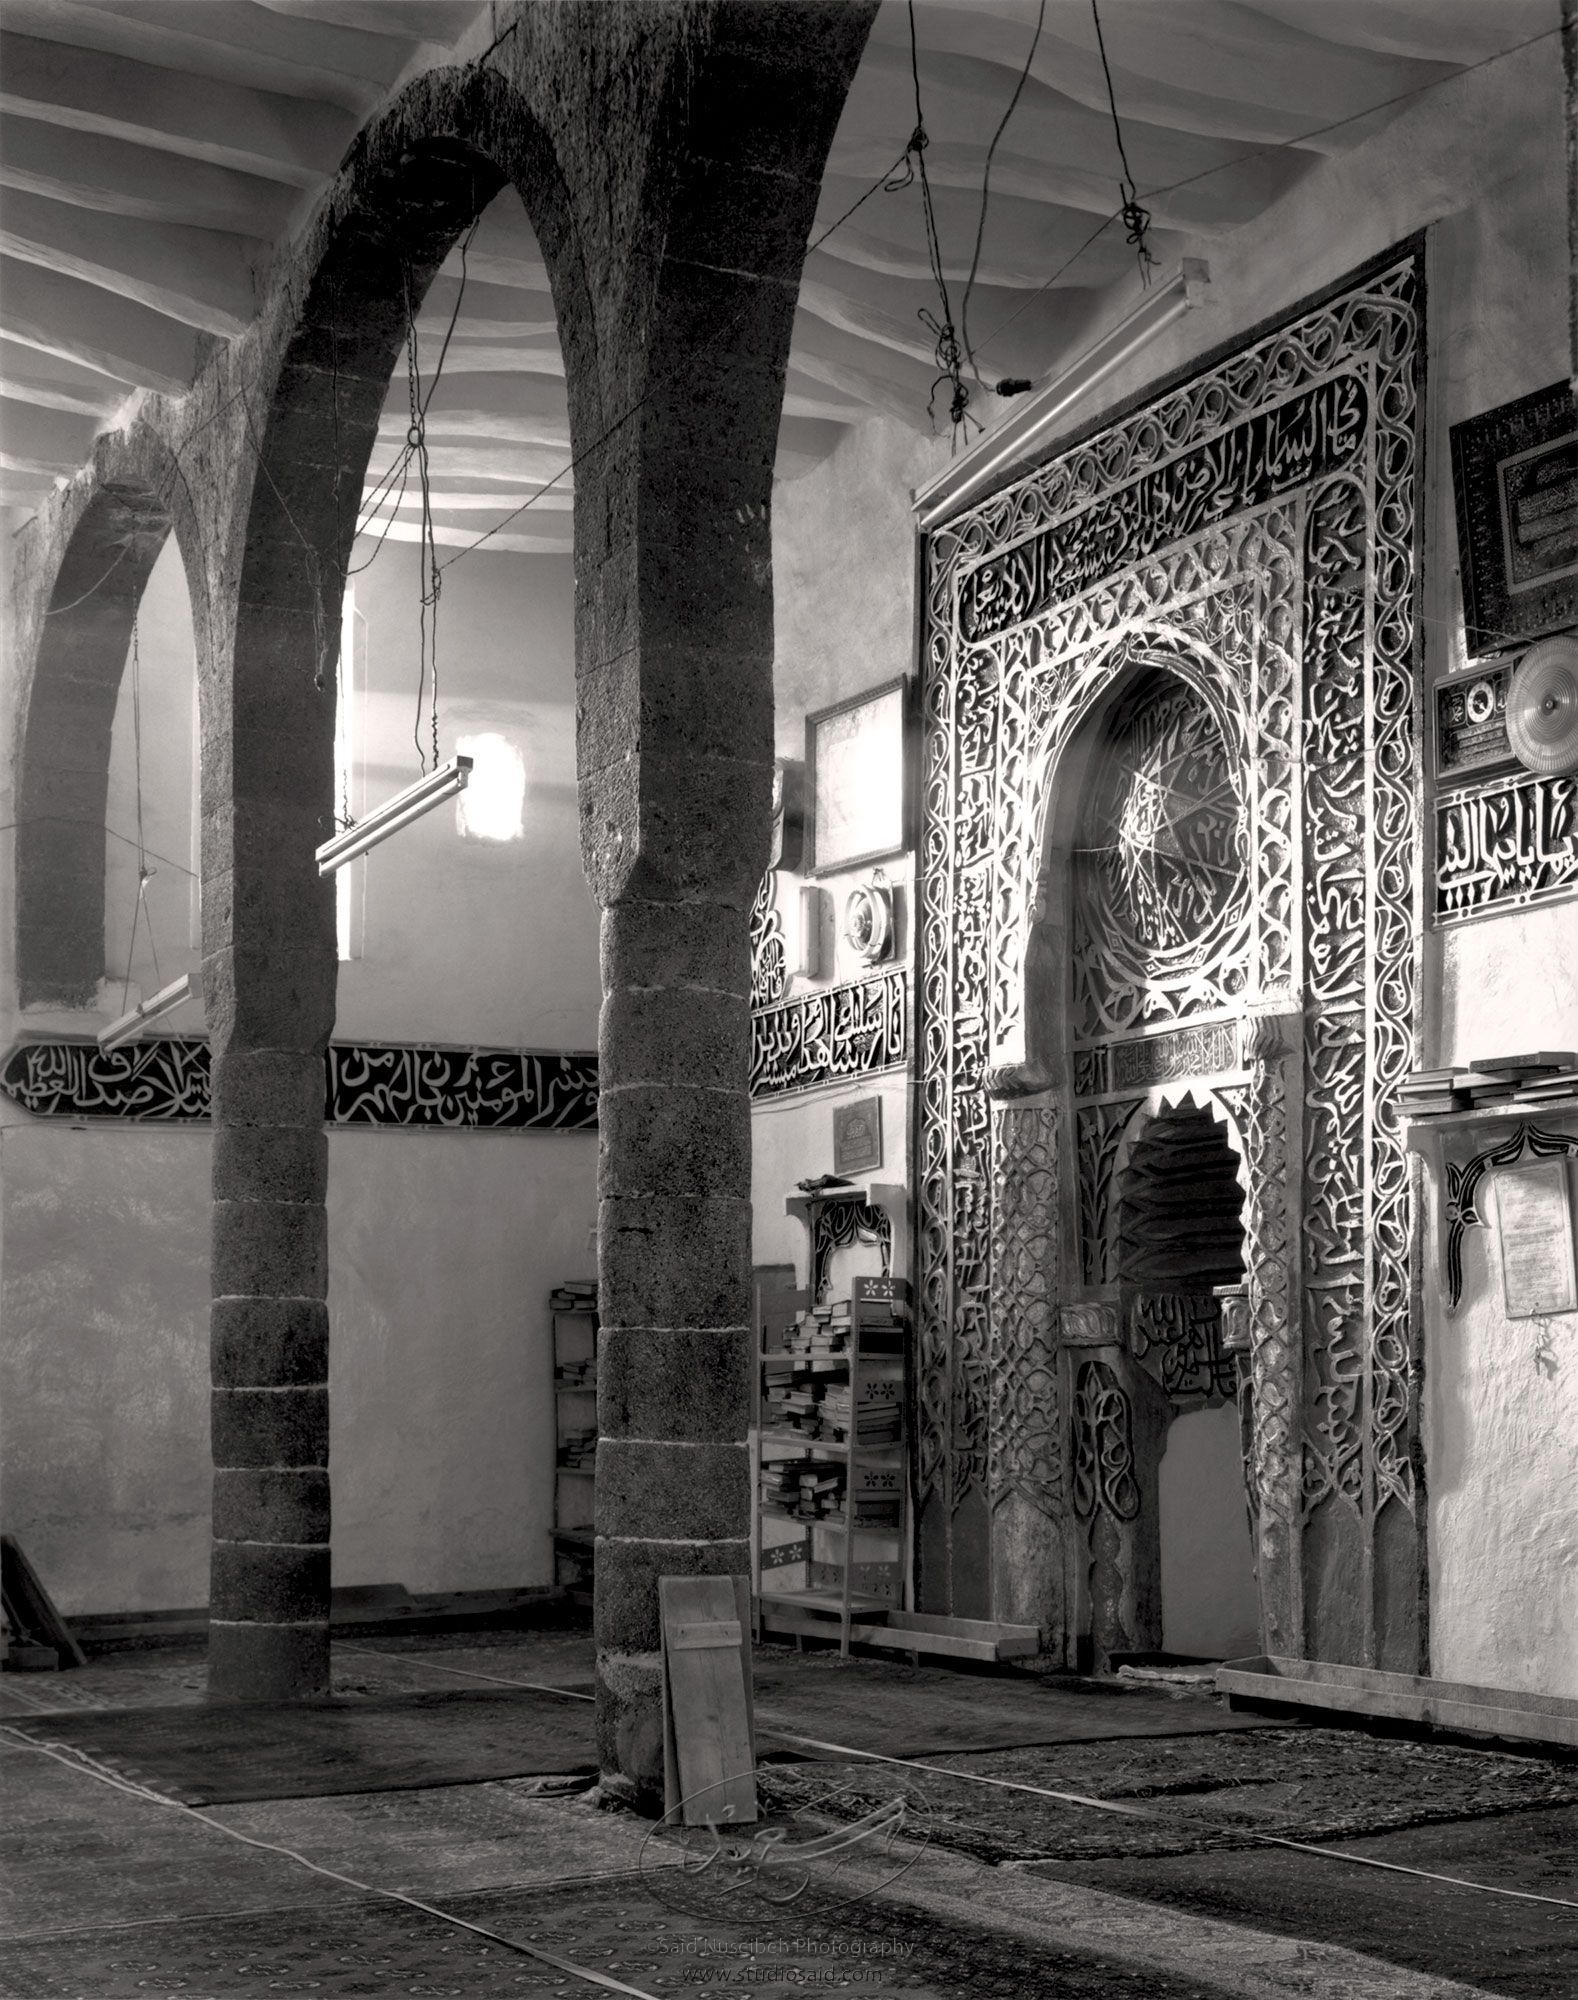 A small neighborhood mosque in the old walled city of Sana'a.